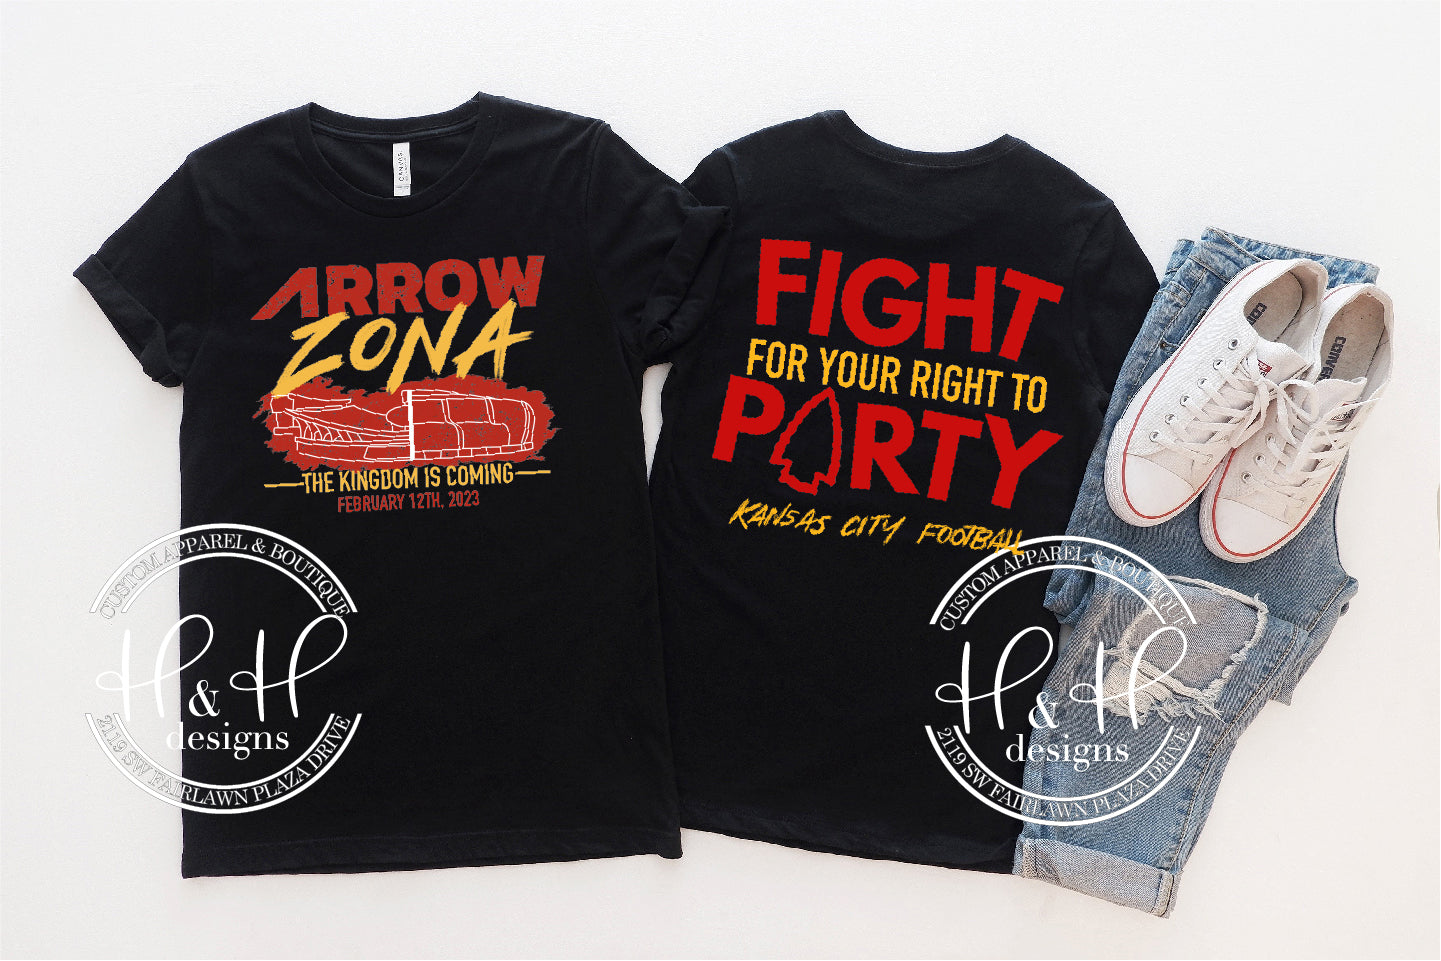 Arrow Zona Front - Fight for your right to Party Back